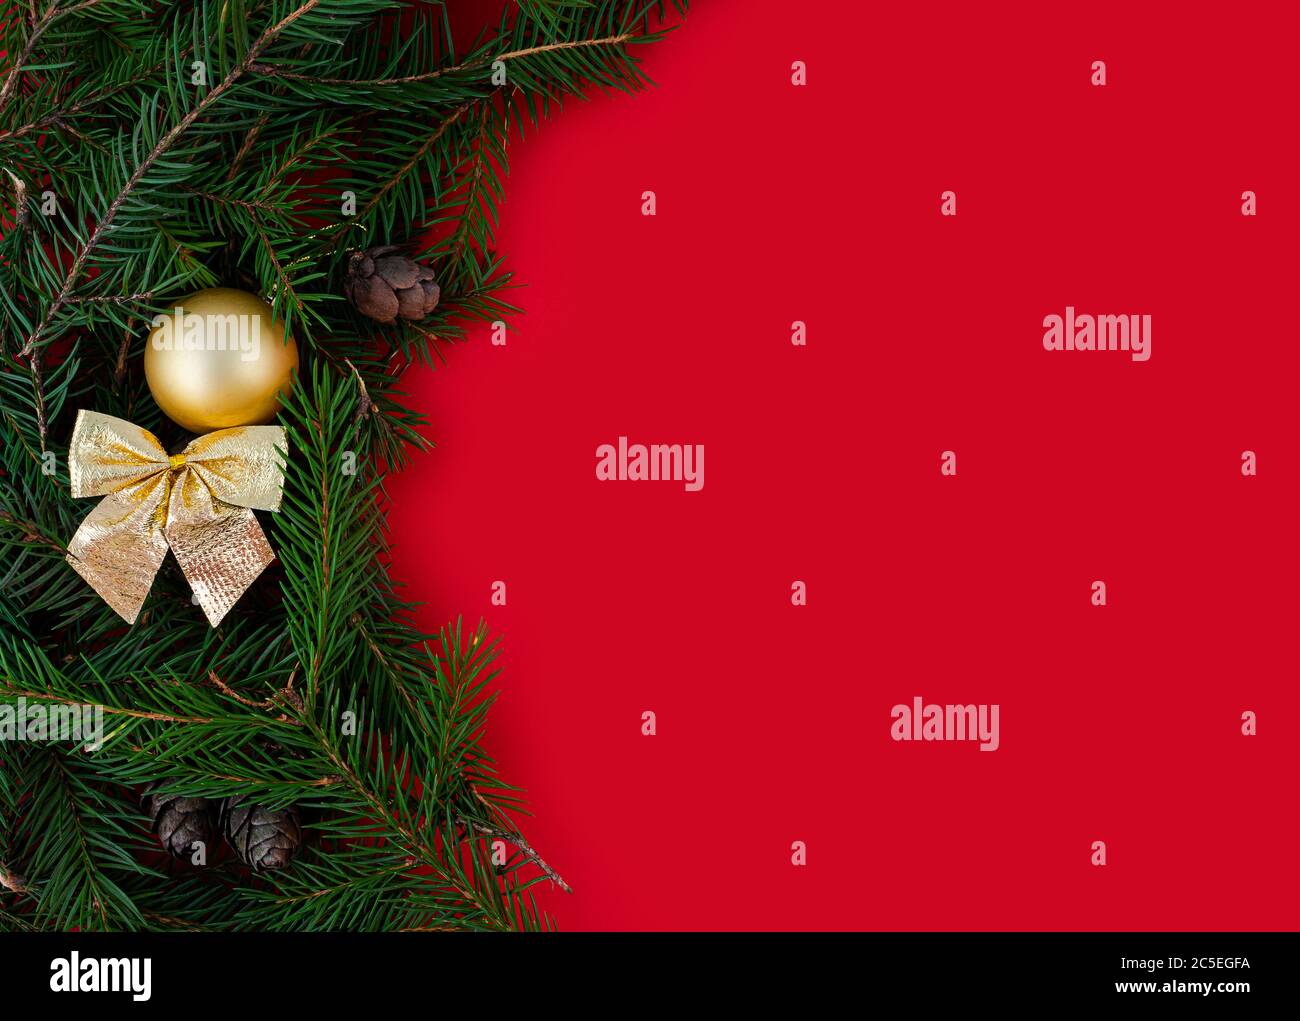 Christmas and New Year red background with fir border Stock Photo